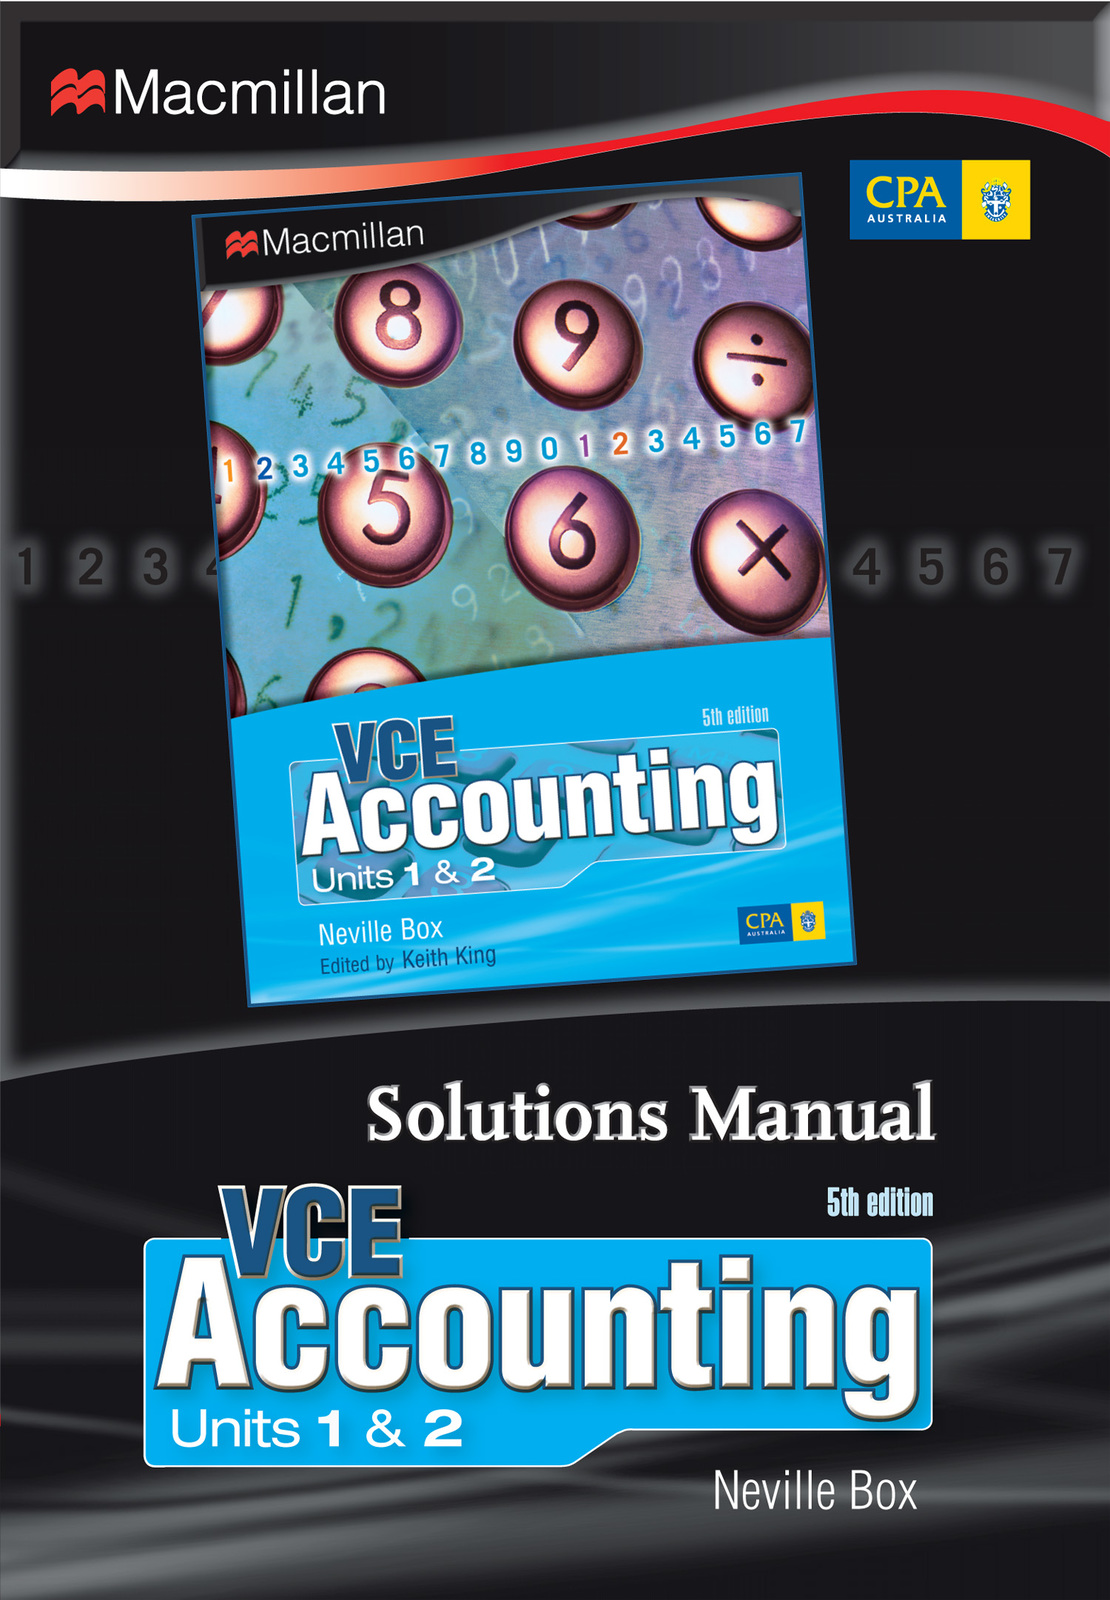 VCE Accounting Units 1&2 Solutions Manual DVD (Fifth Edition) Macmillan Educational